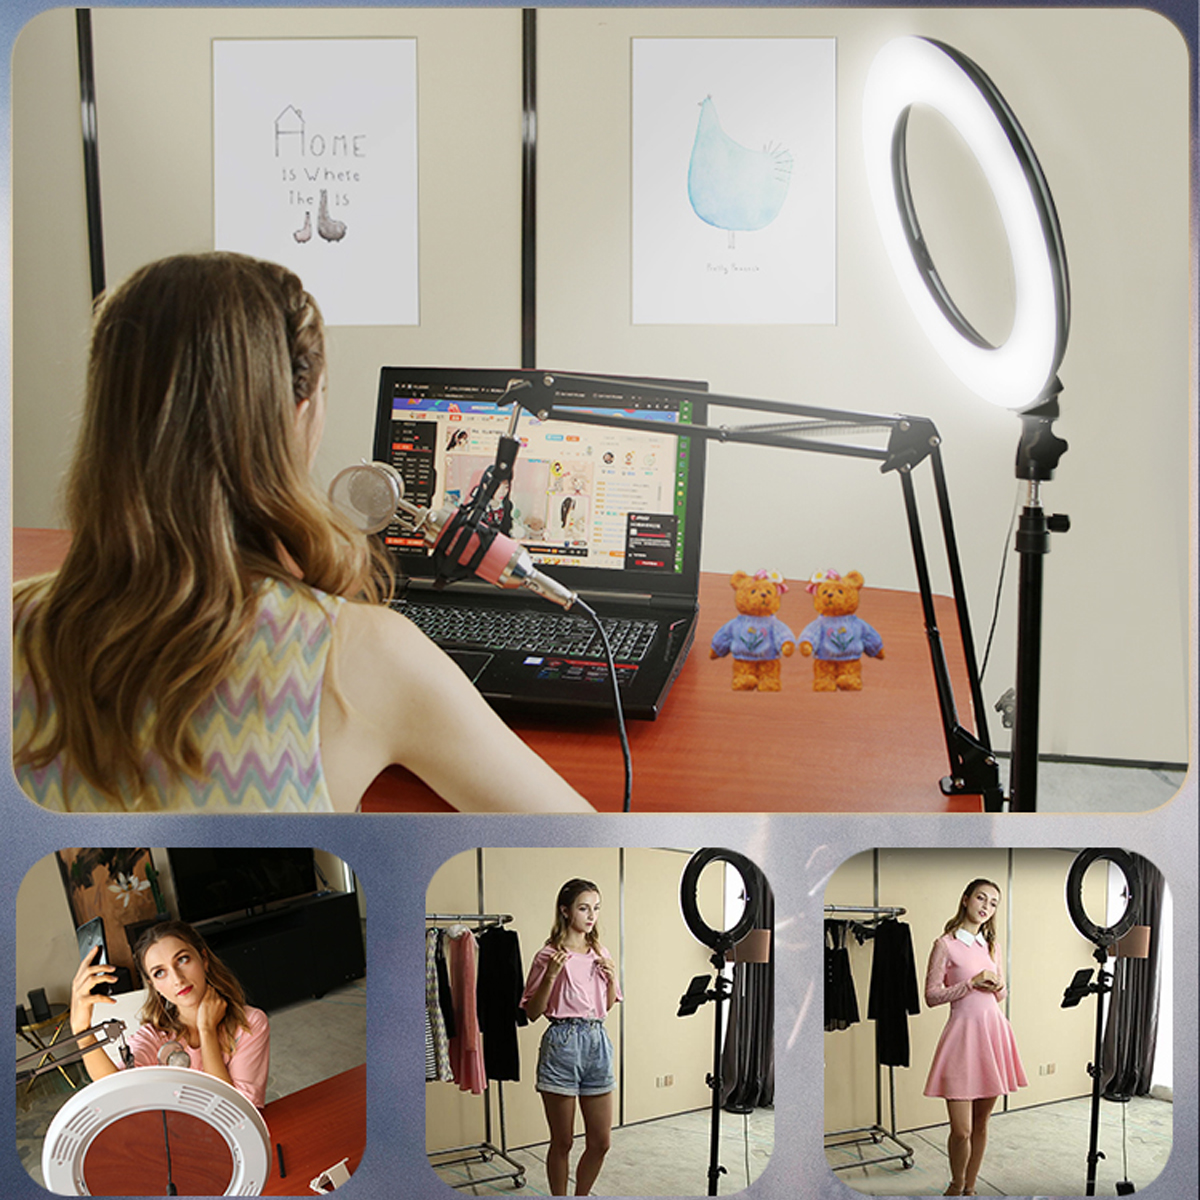 Bakeey 19 inch Fill Light 592pcs LED Cold Warm Color Polarless Dimming 7 Color RGB 3200K-6500K with 1.8m Phone Clip Bracket Power Adapter